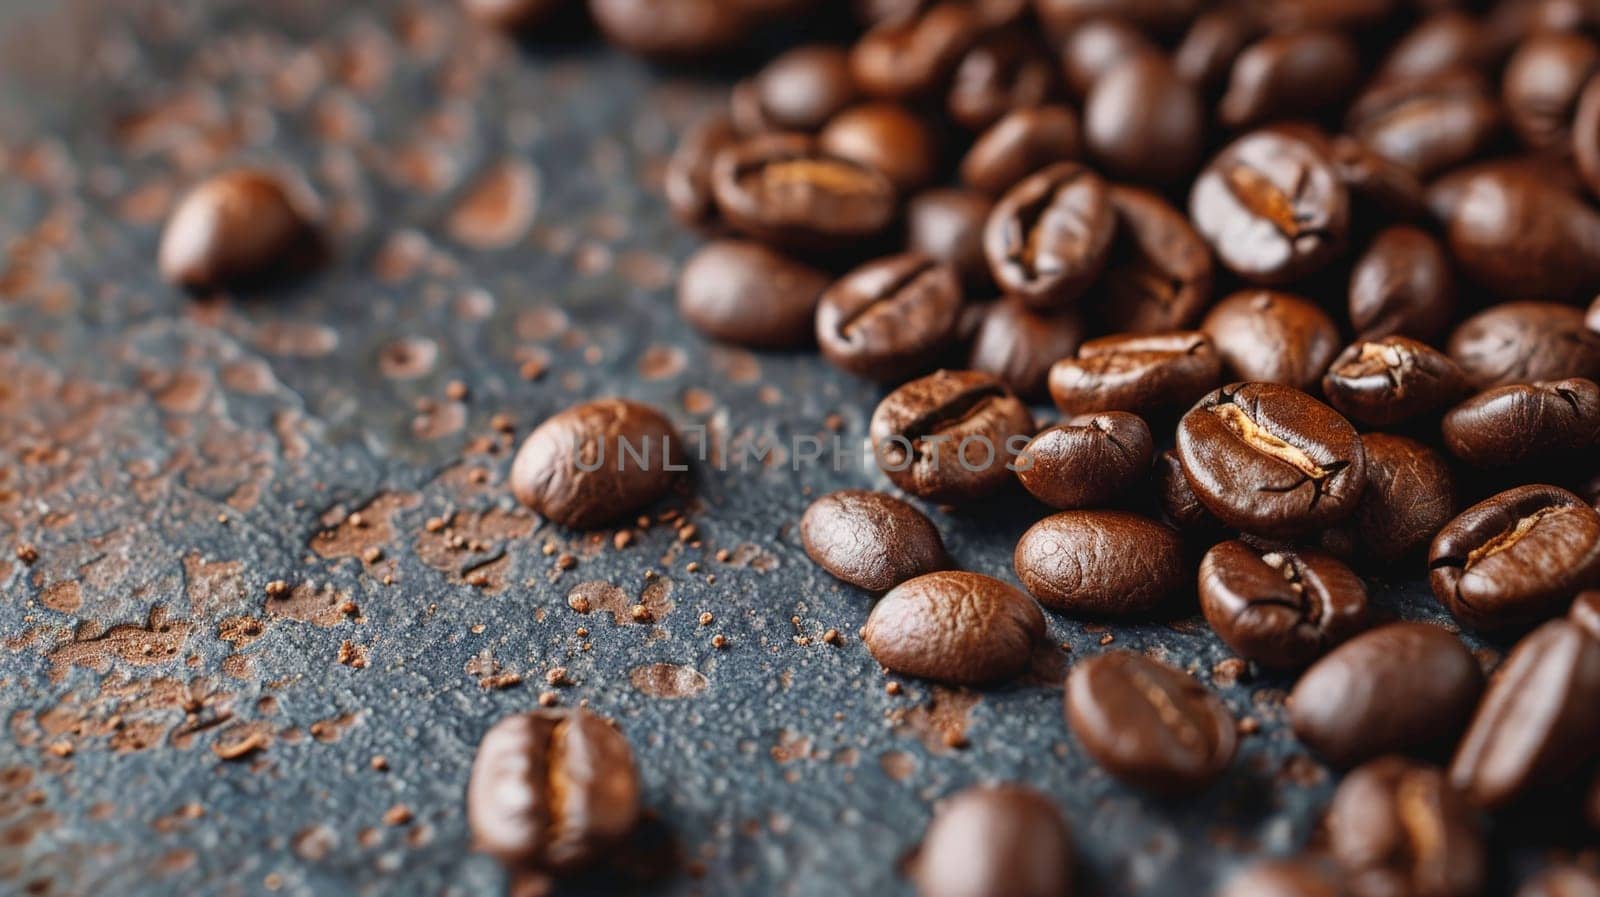 A pile of coffee beans on the table, Texture of roasted coffee beans.